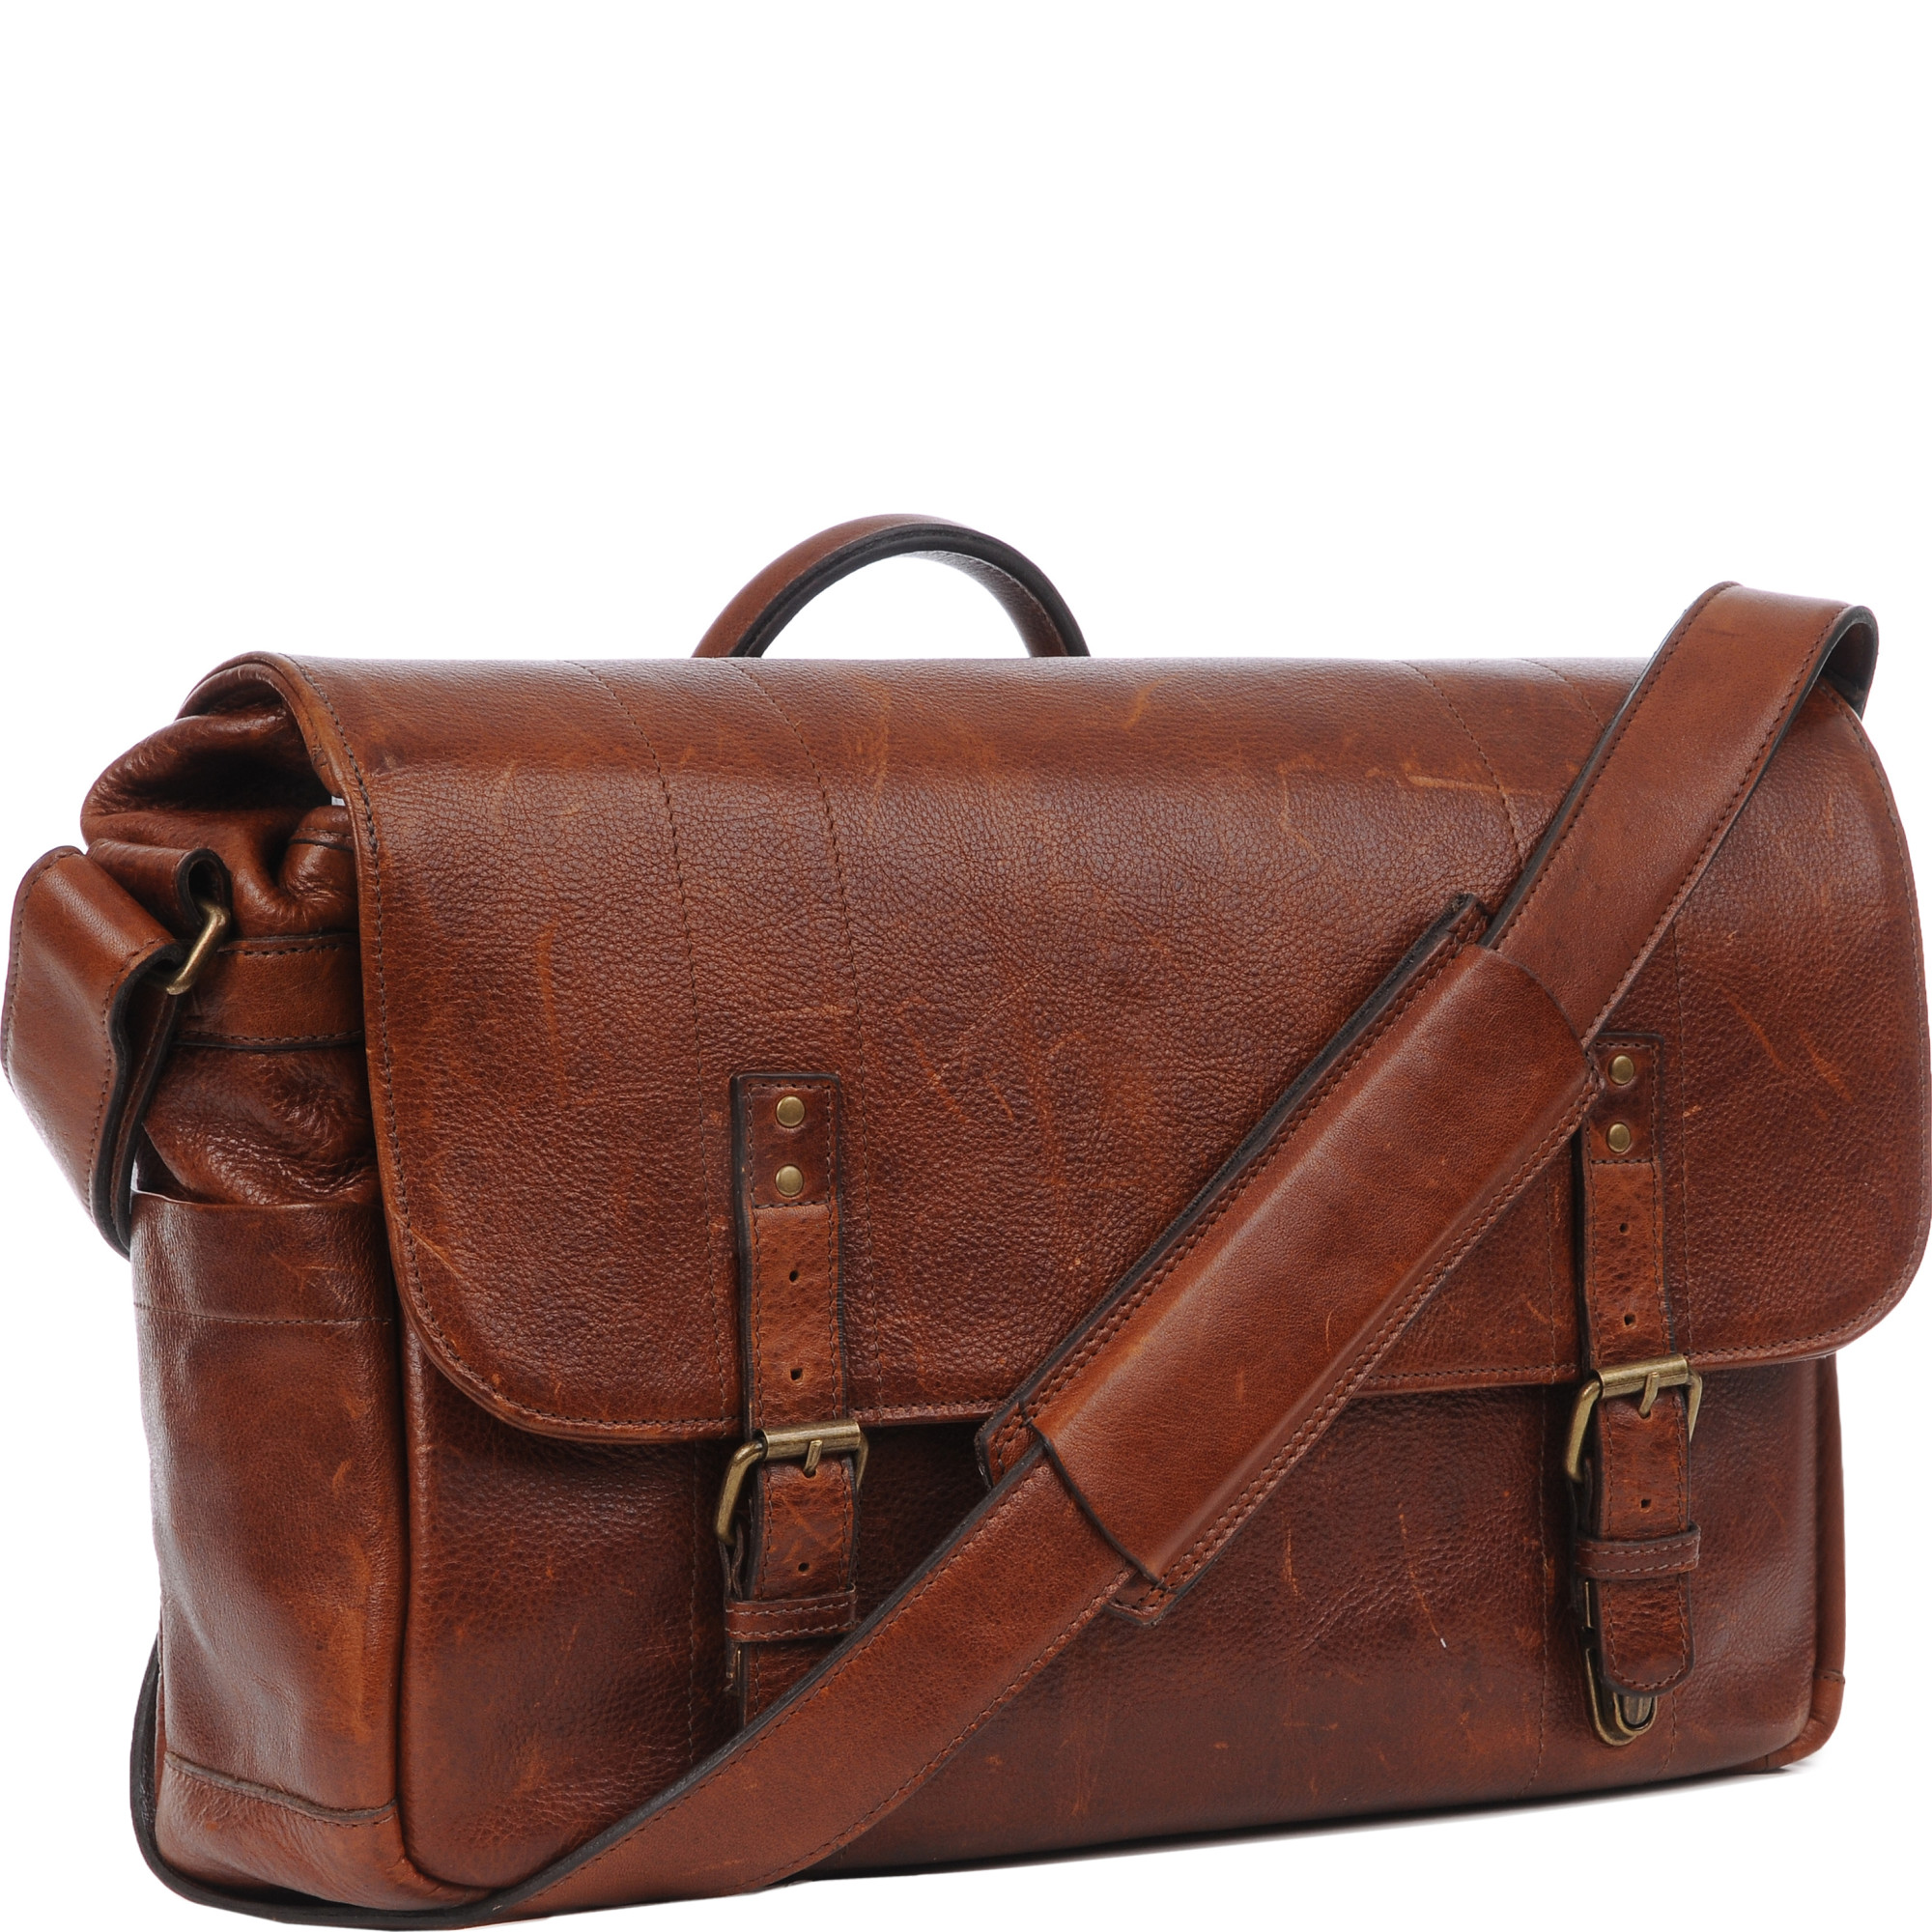 The Leather Union Street by ONA | Houden Bags